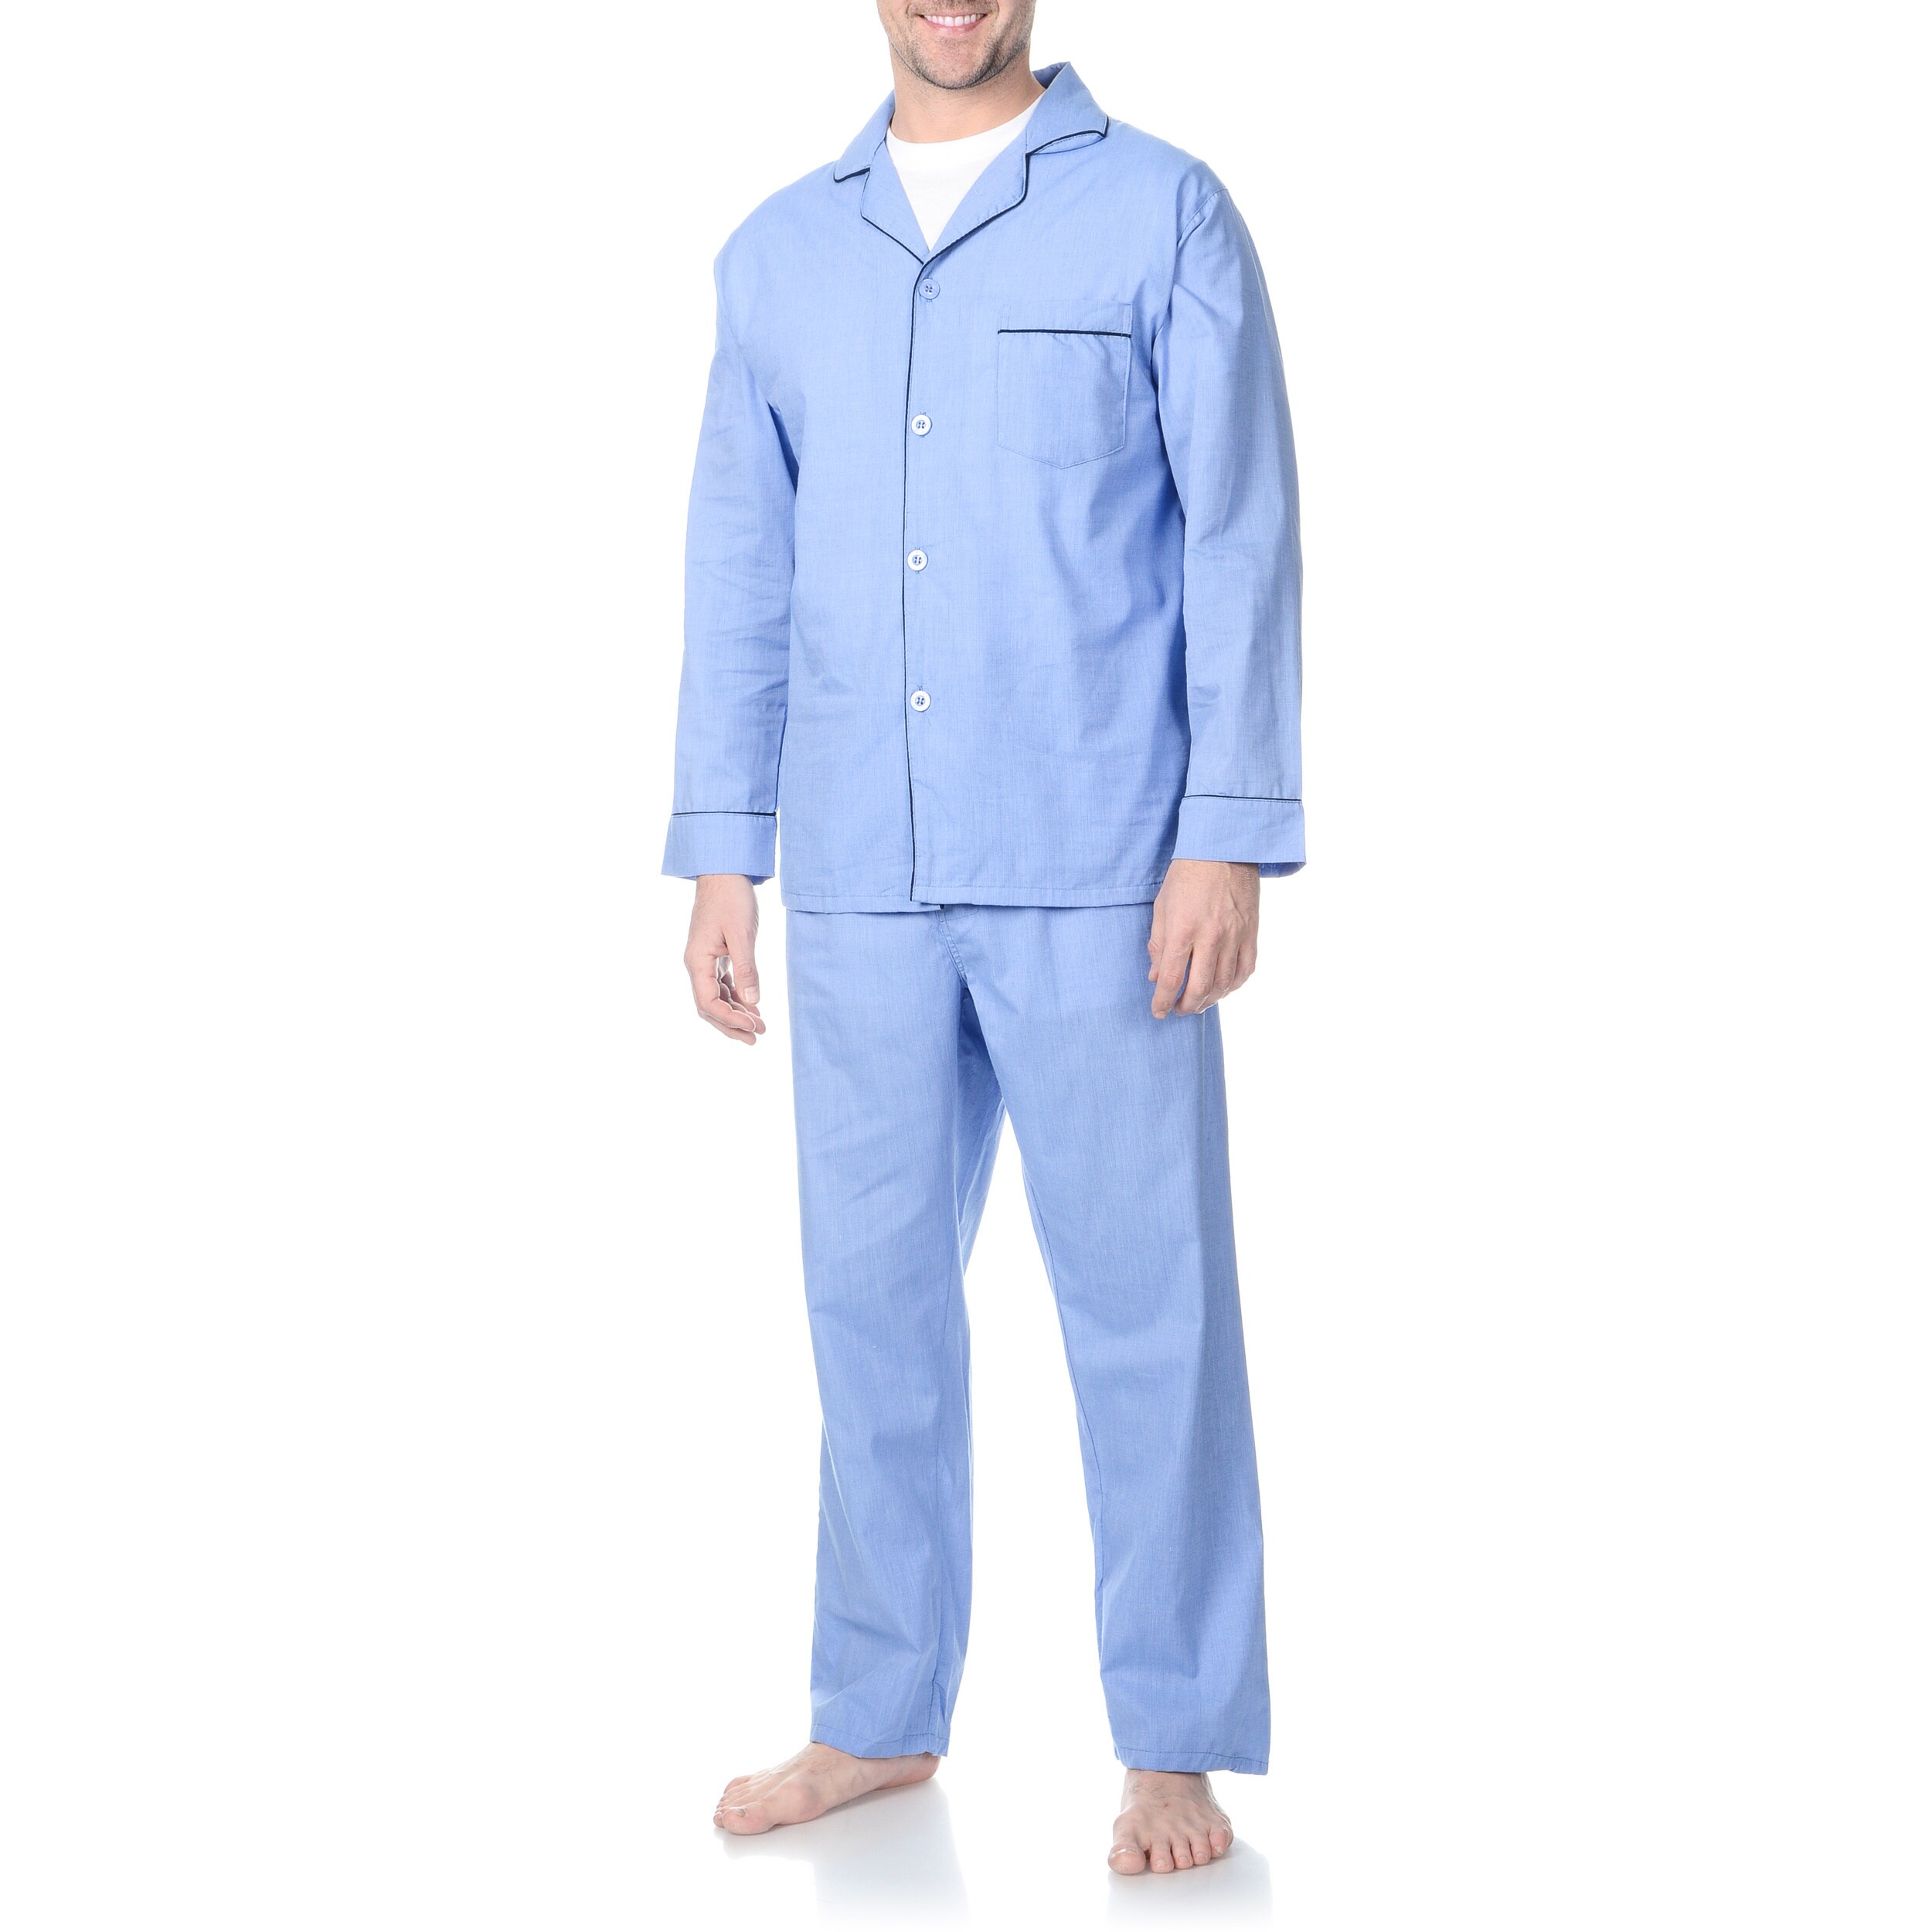 Pajama Sets Clothing & Accessories Geoffrey Beene Mens Big-Tall Striped ...